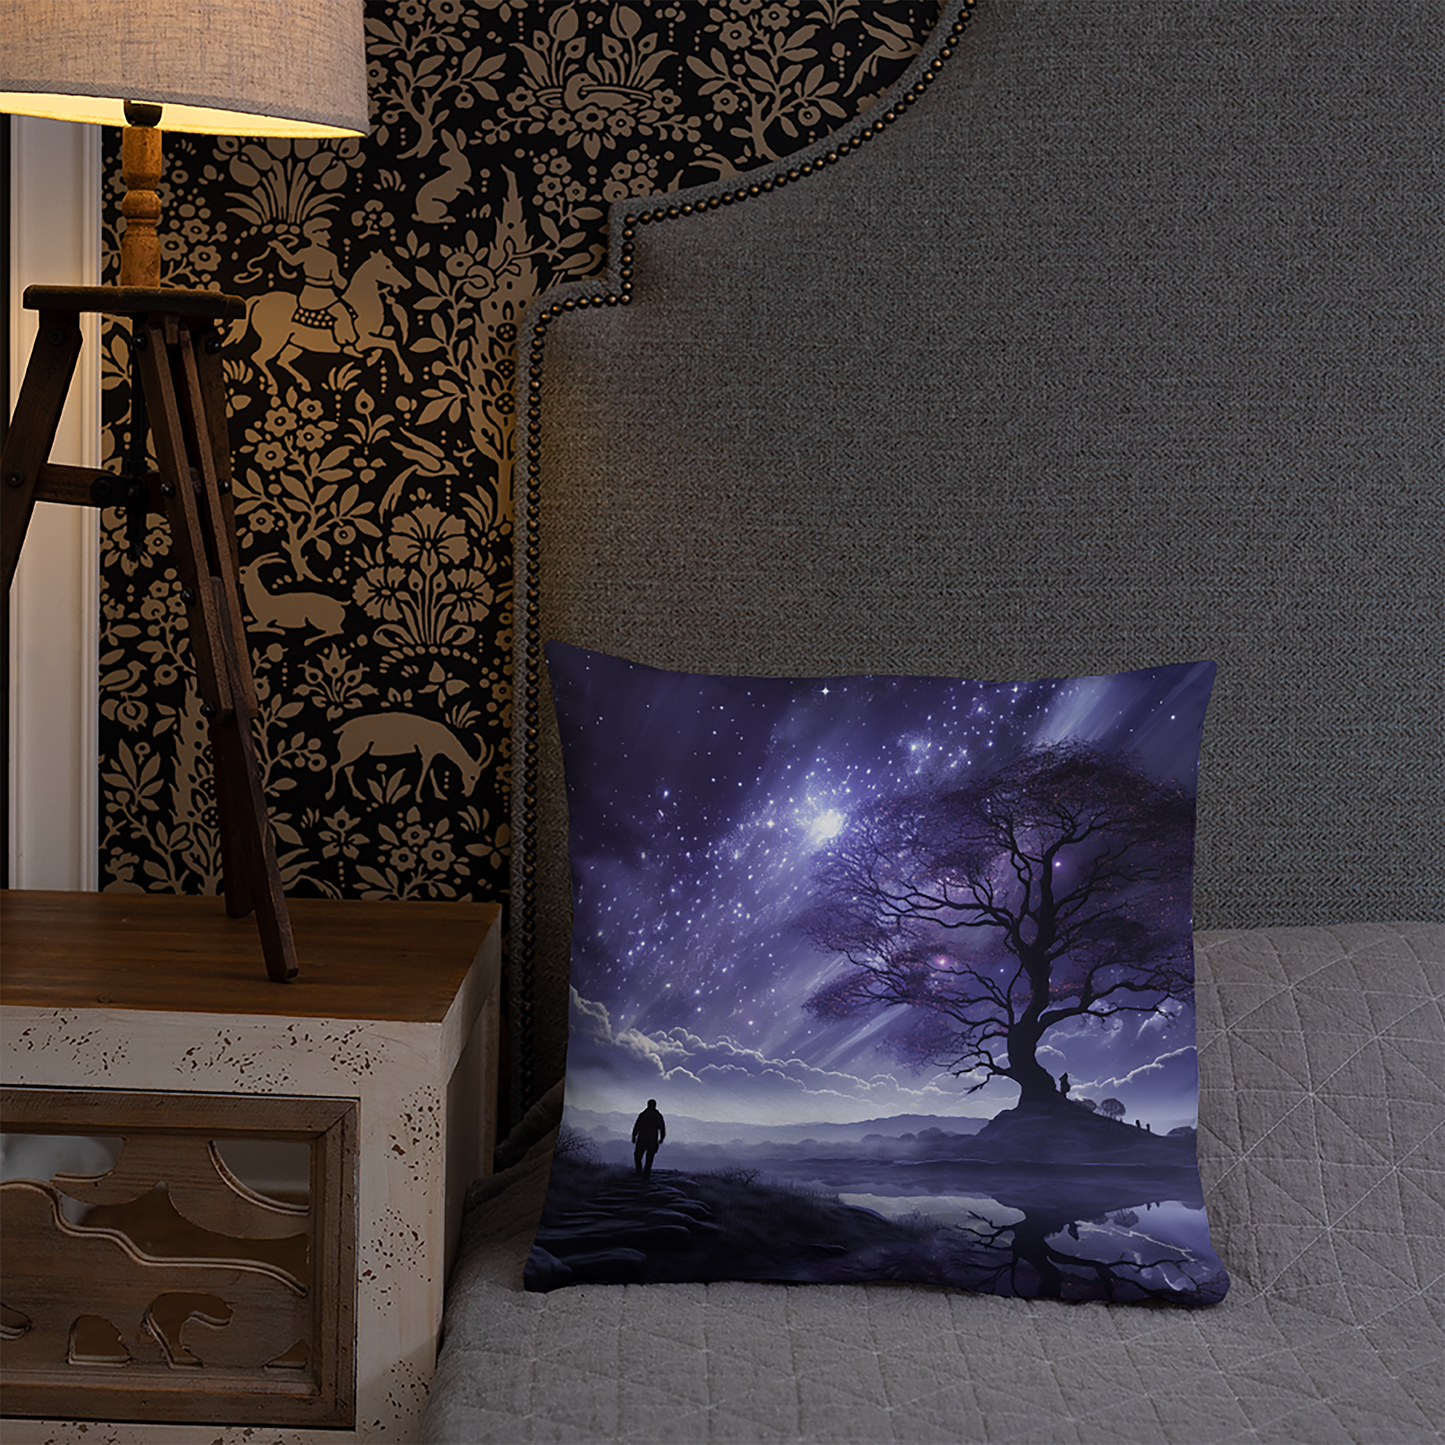 Space Throw Pillow Otherworldly Visions Serenity Polyester Decorative Cushion 18x18